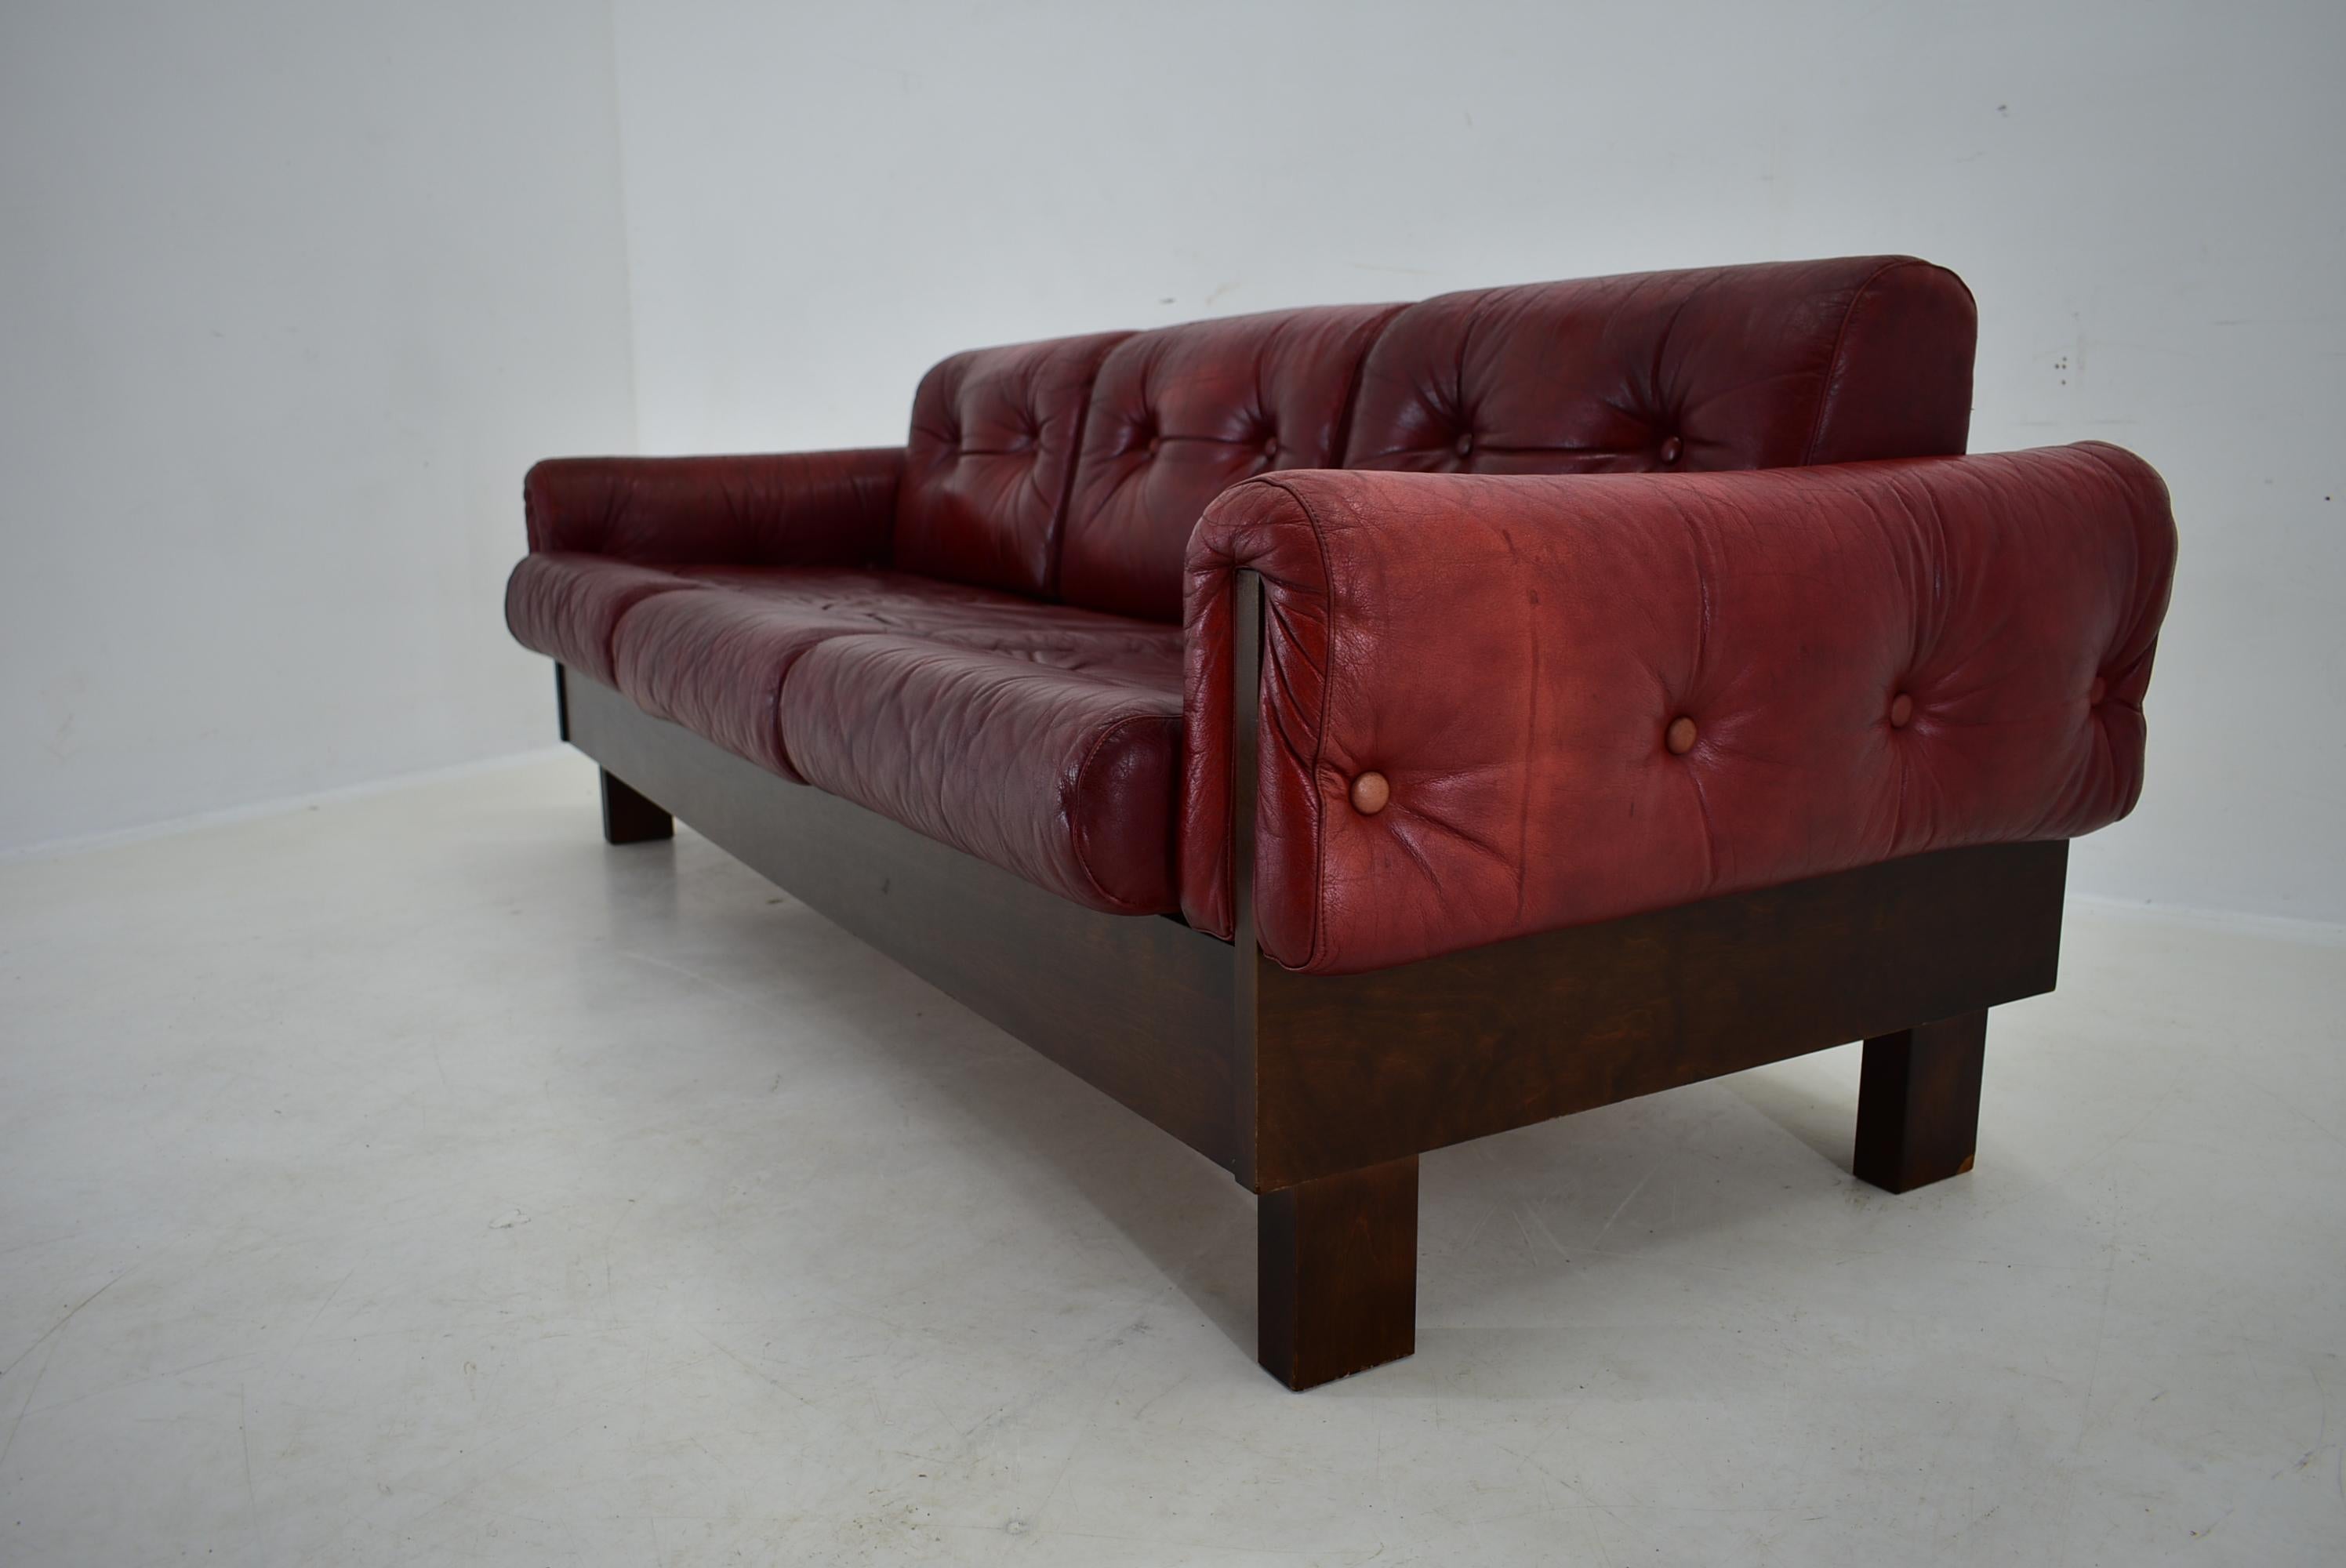 1970s Red Leather 3-Seater Sofa, Finland For Sale 4